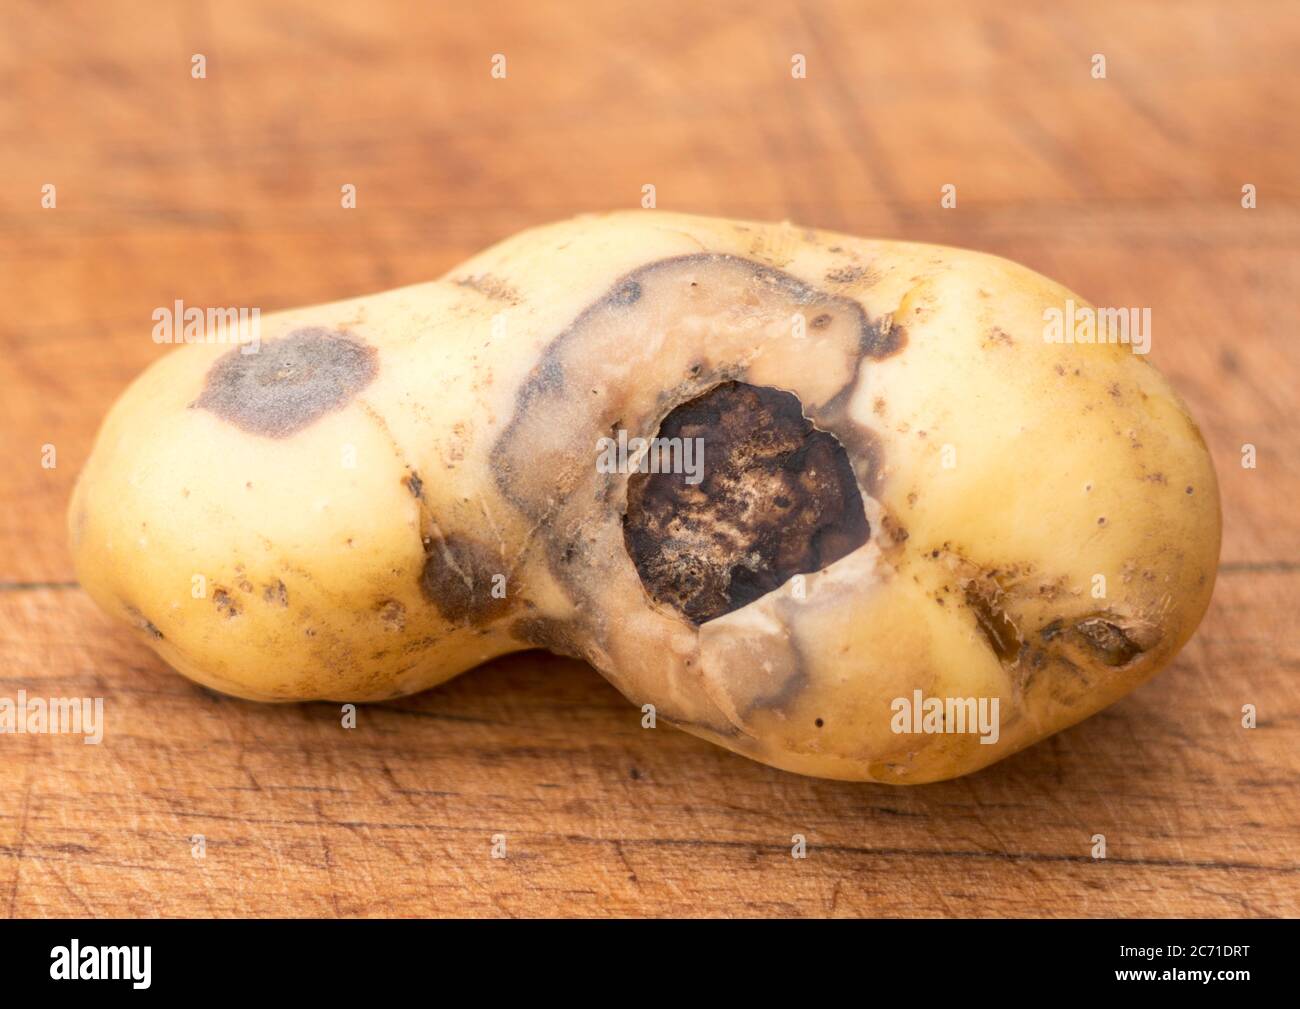 A potato tuber, variety Charlotte,  showing damage due to fungal disease, possibly gangrene. Stock Photo